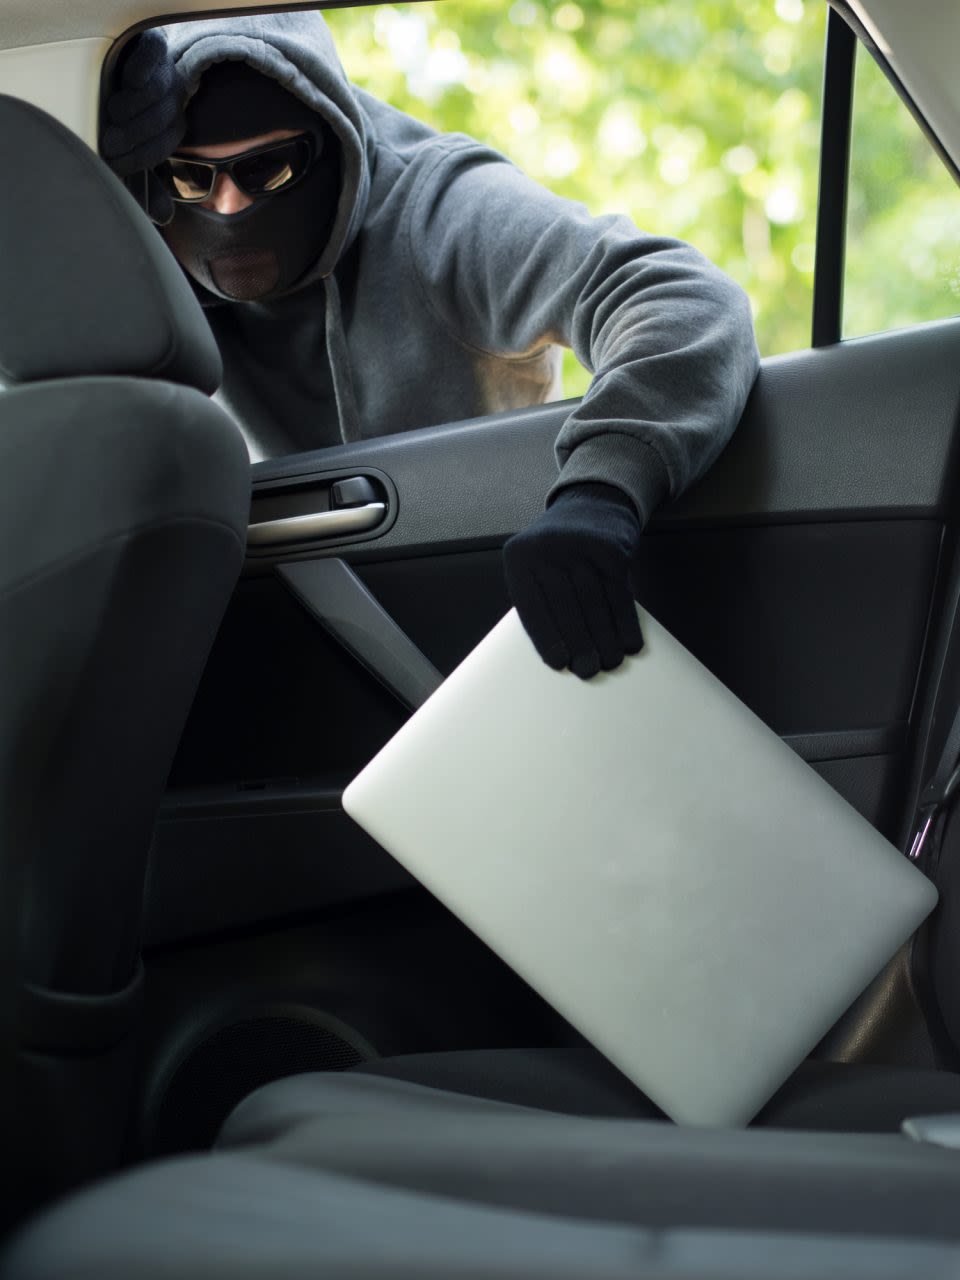 Someone stealing a laptop